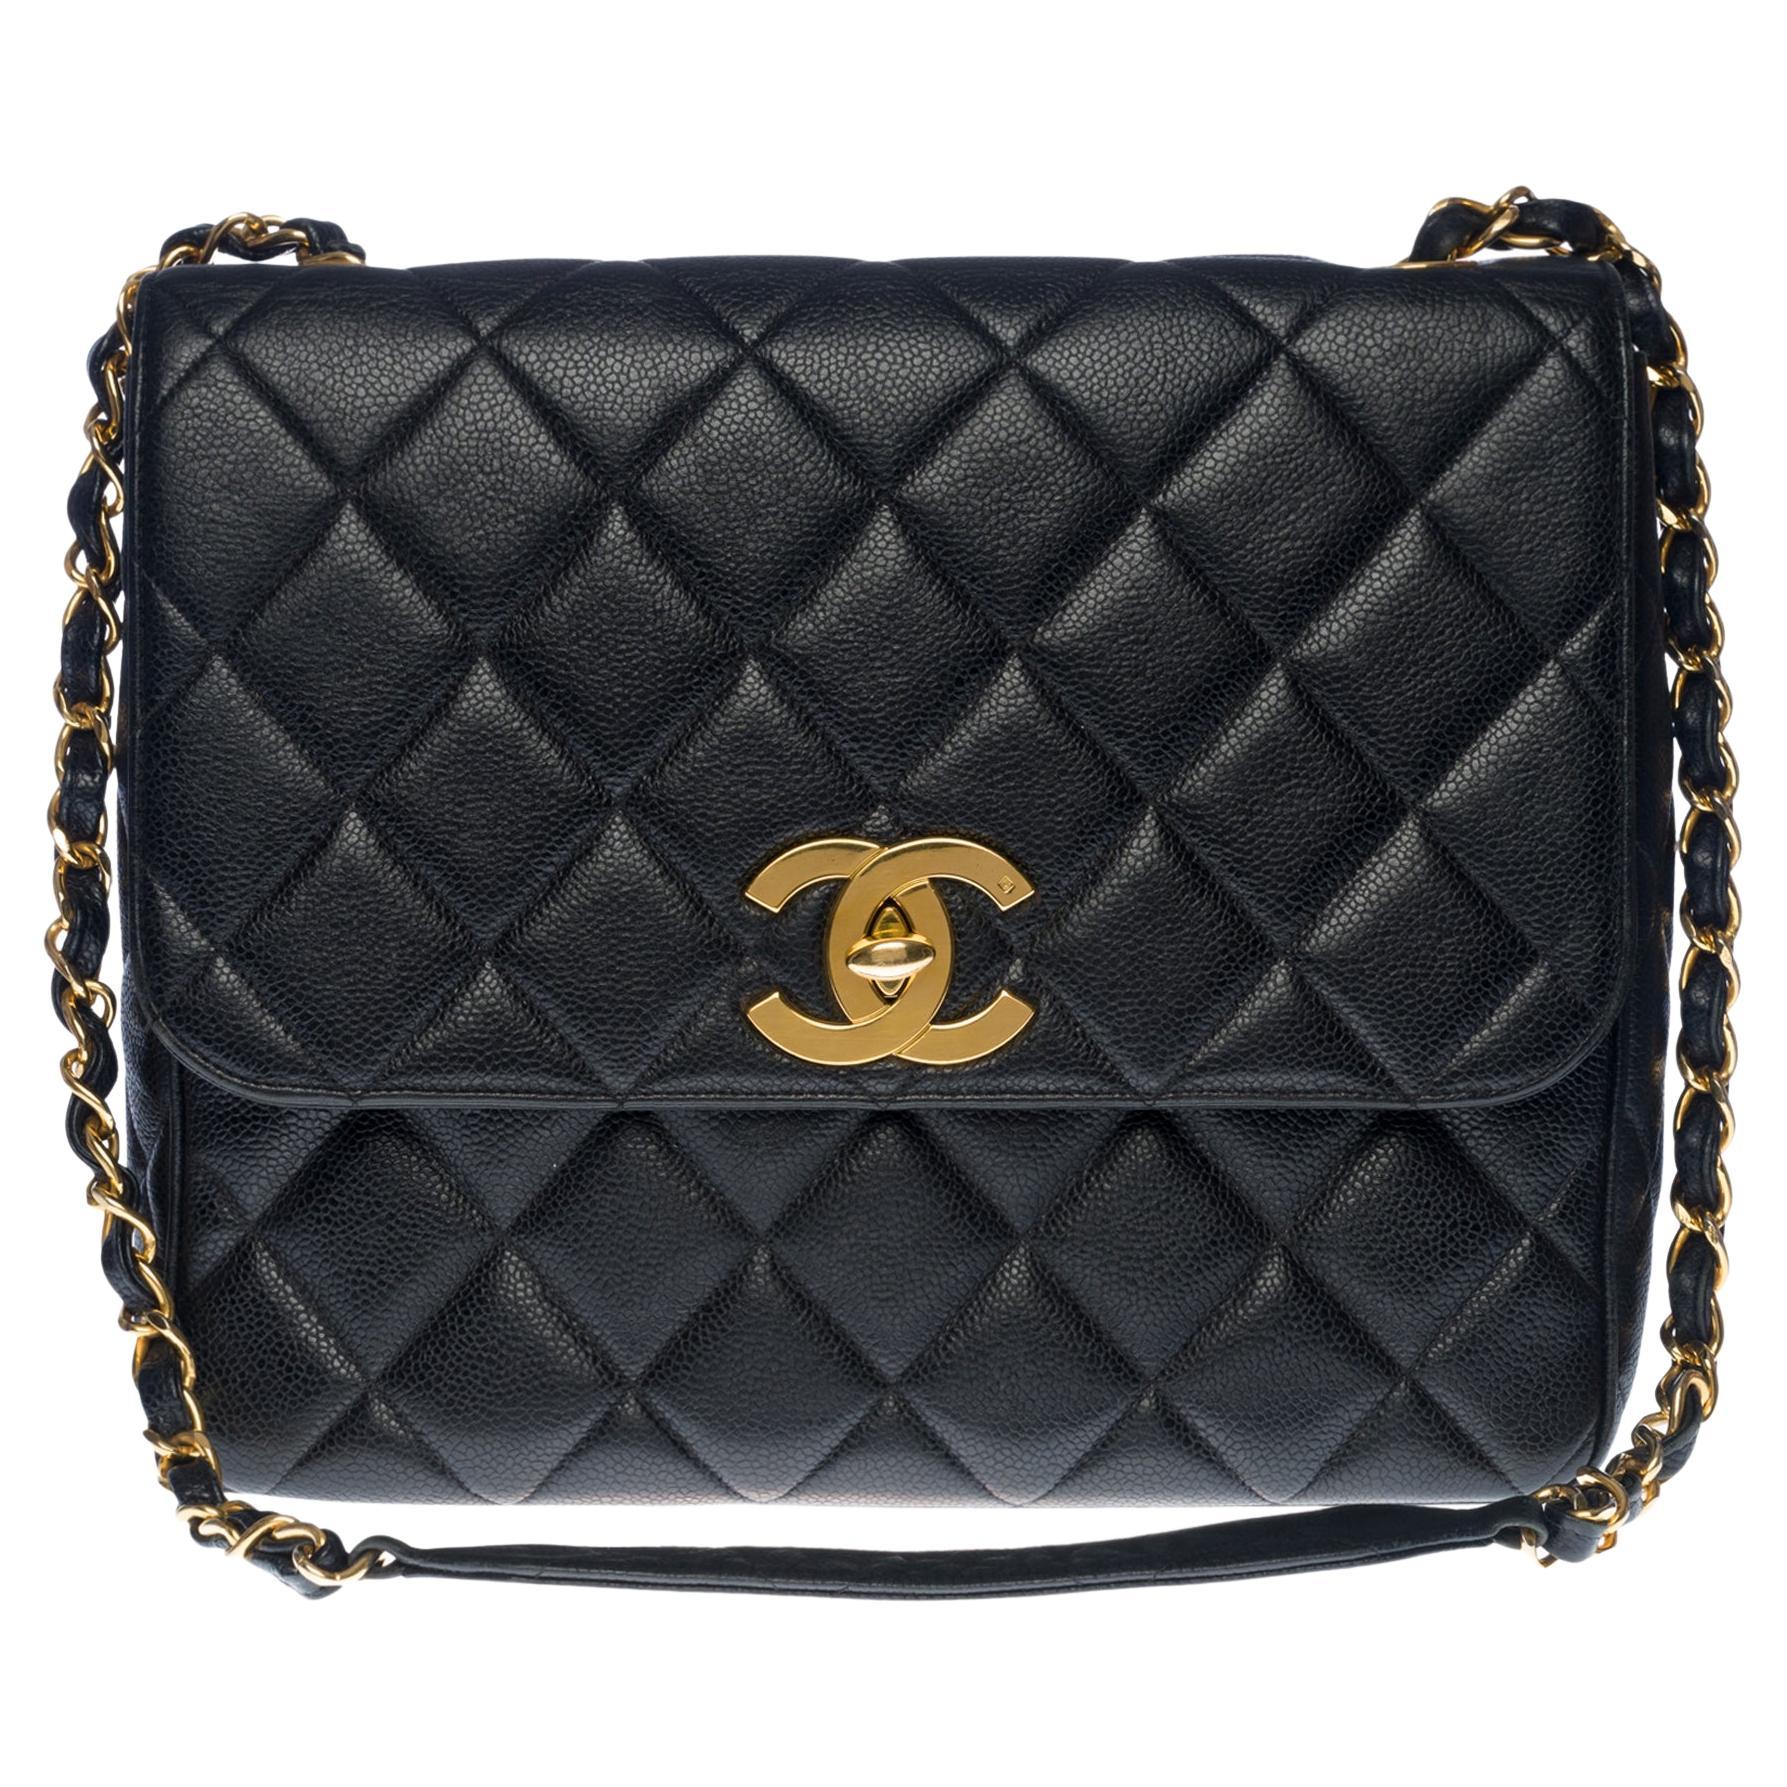 Rare Chanel Maxi shoulder flap bag in black caviar quilted leather, GHW